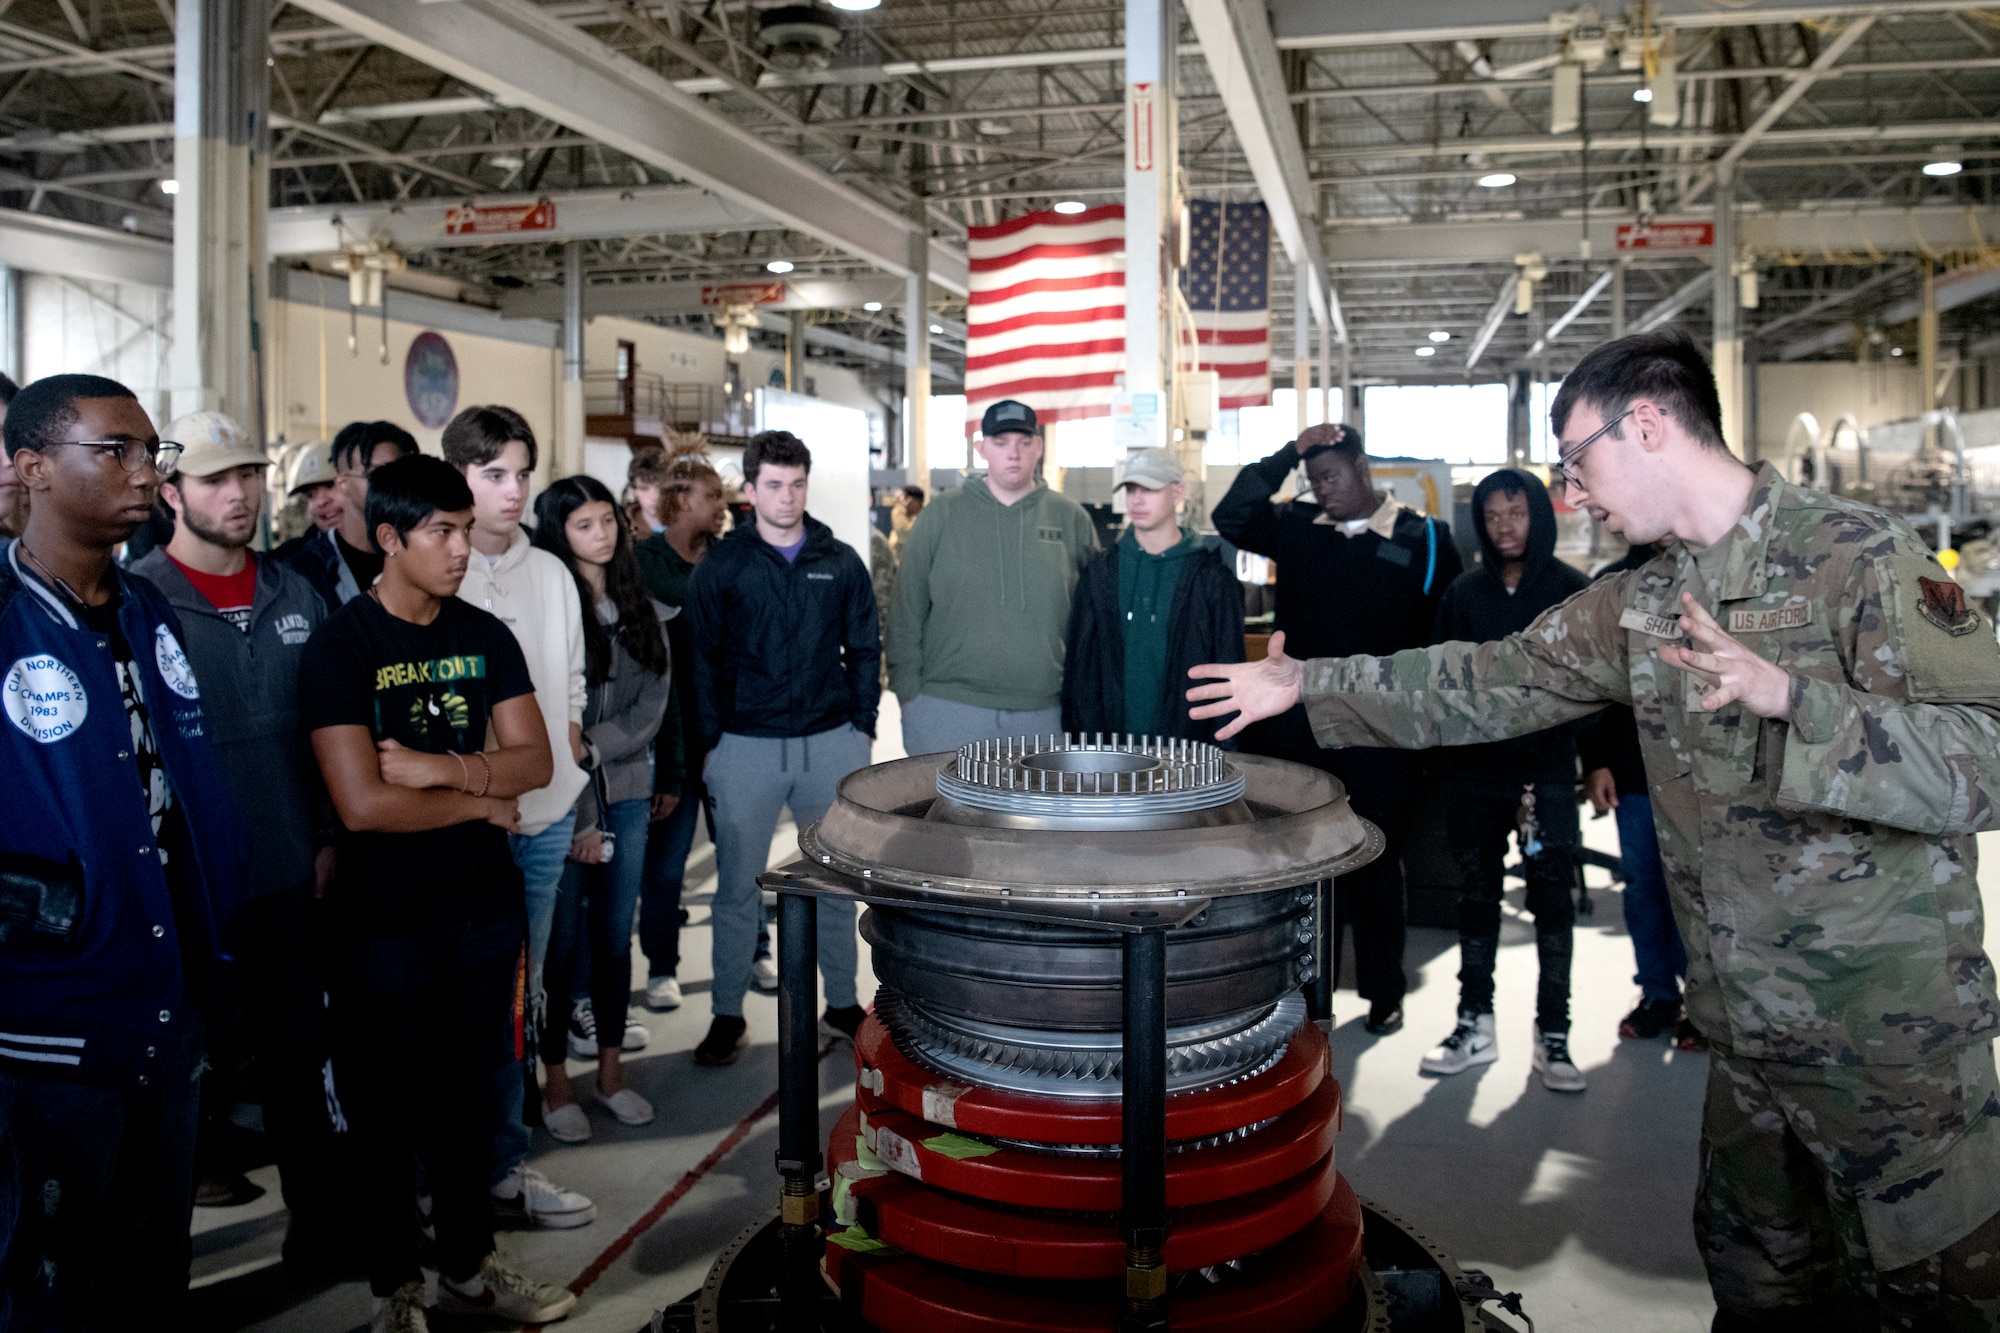 U.S. Air Force Senior Airman Nicholas Shaw, 20th Component Maintenance Squadron F110 Jet Engine Intermediate Maintenance technician, shows Florence 1 School District’s Advantage Academy students parts of an engine used in F-16 Fighting Falcon operations at Shaw Air Force Base, S.C., Nov. 30, 2022. Units from Ninth Air Force (Air Forces Central), 15th Air Force and the 20th Fighter Wing worked together to host an engagement for 35 local high school students as part of Project Quesada. The new Air Combat Command-led program is designed to attract and recruit talented students seeking careers in aviation, science, technology, engineering and math in an effort to develop future aviators and leaders. (U.S. Air Force photo by Staff Sgt. Kelsey Owen)